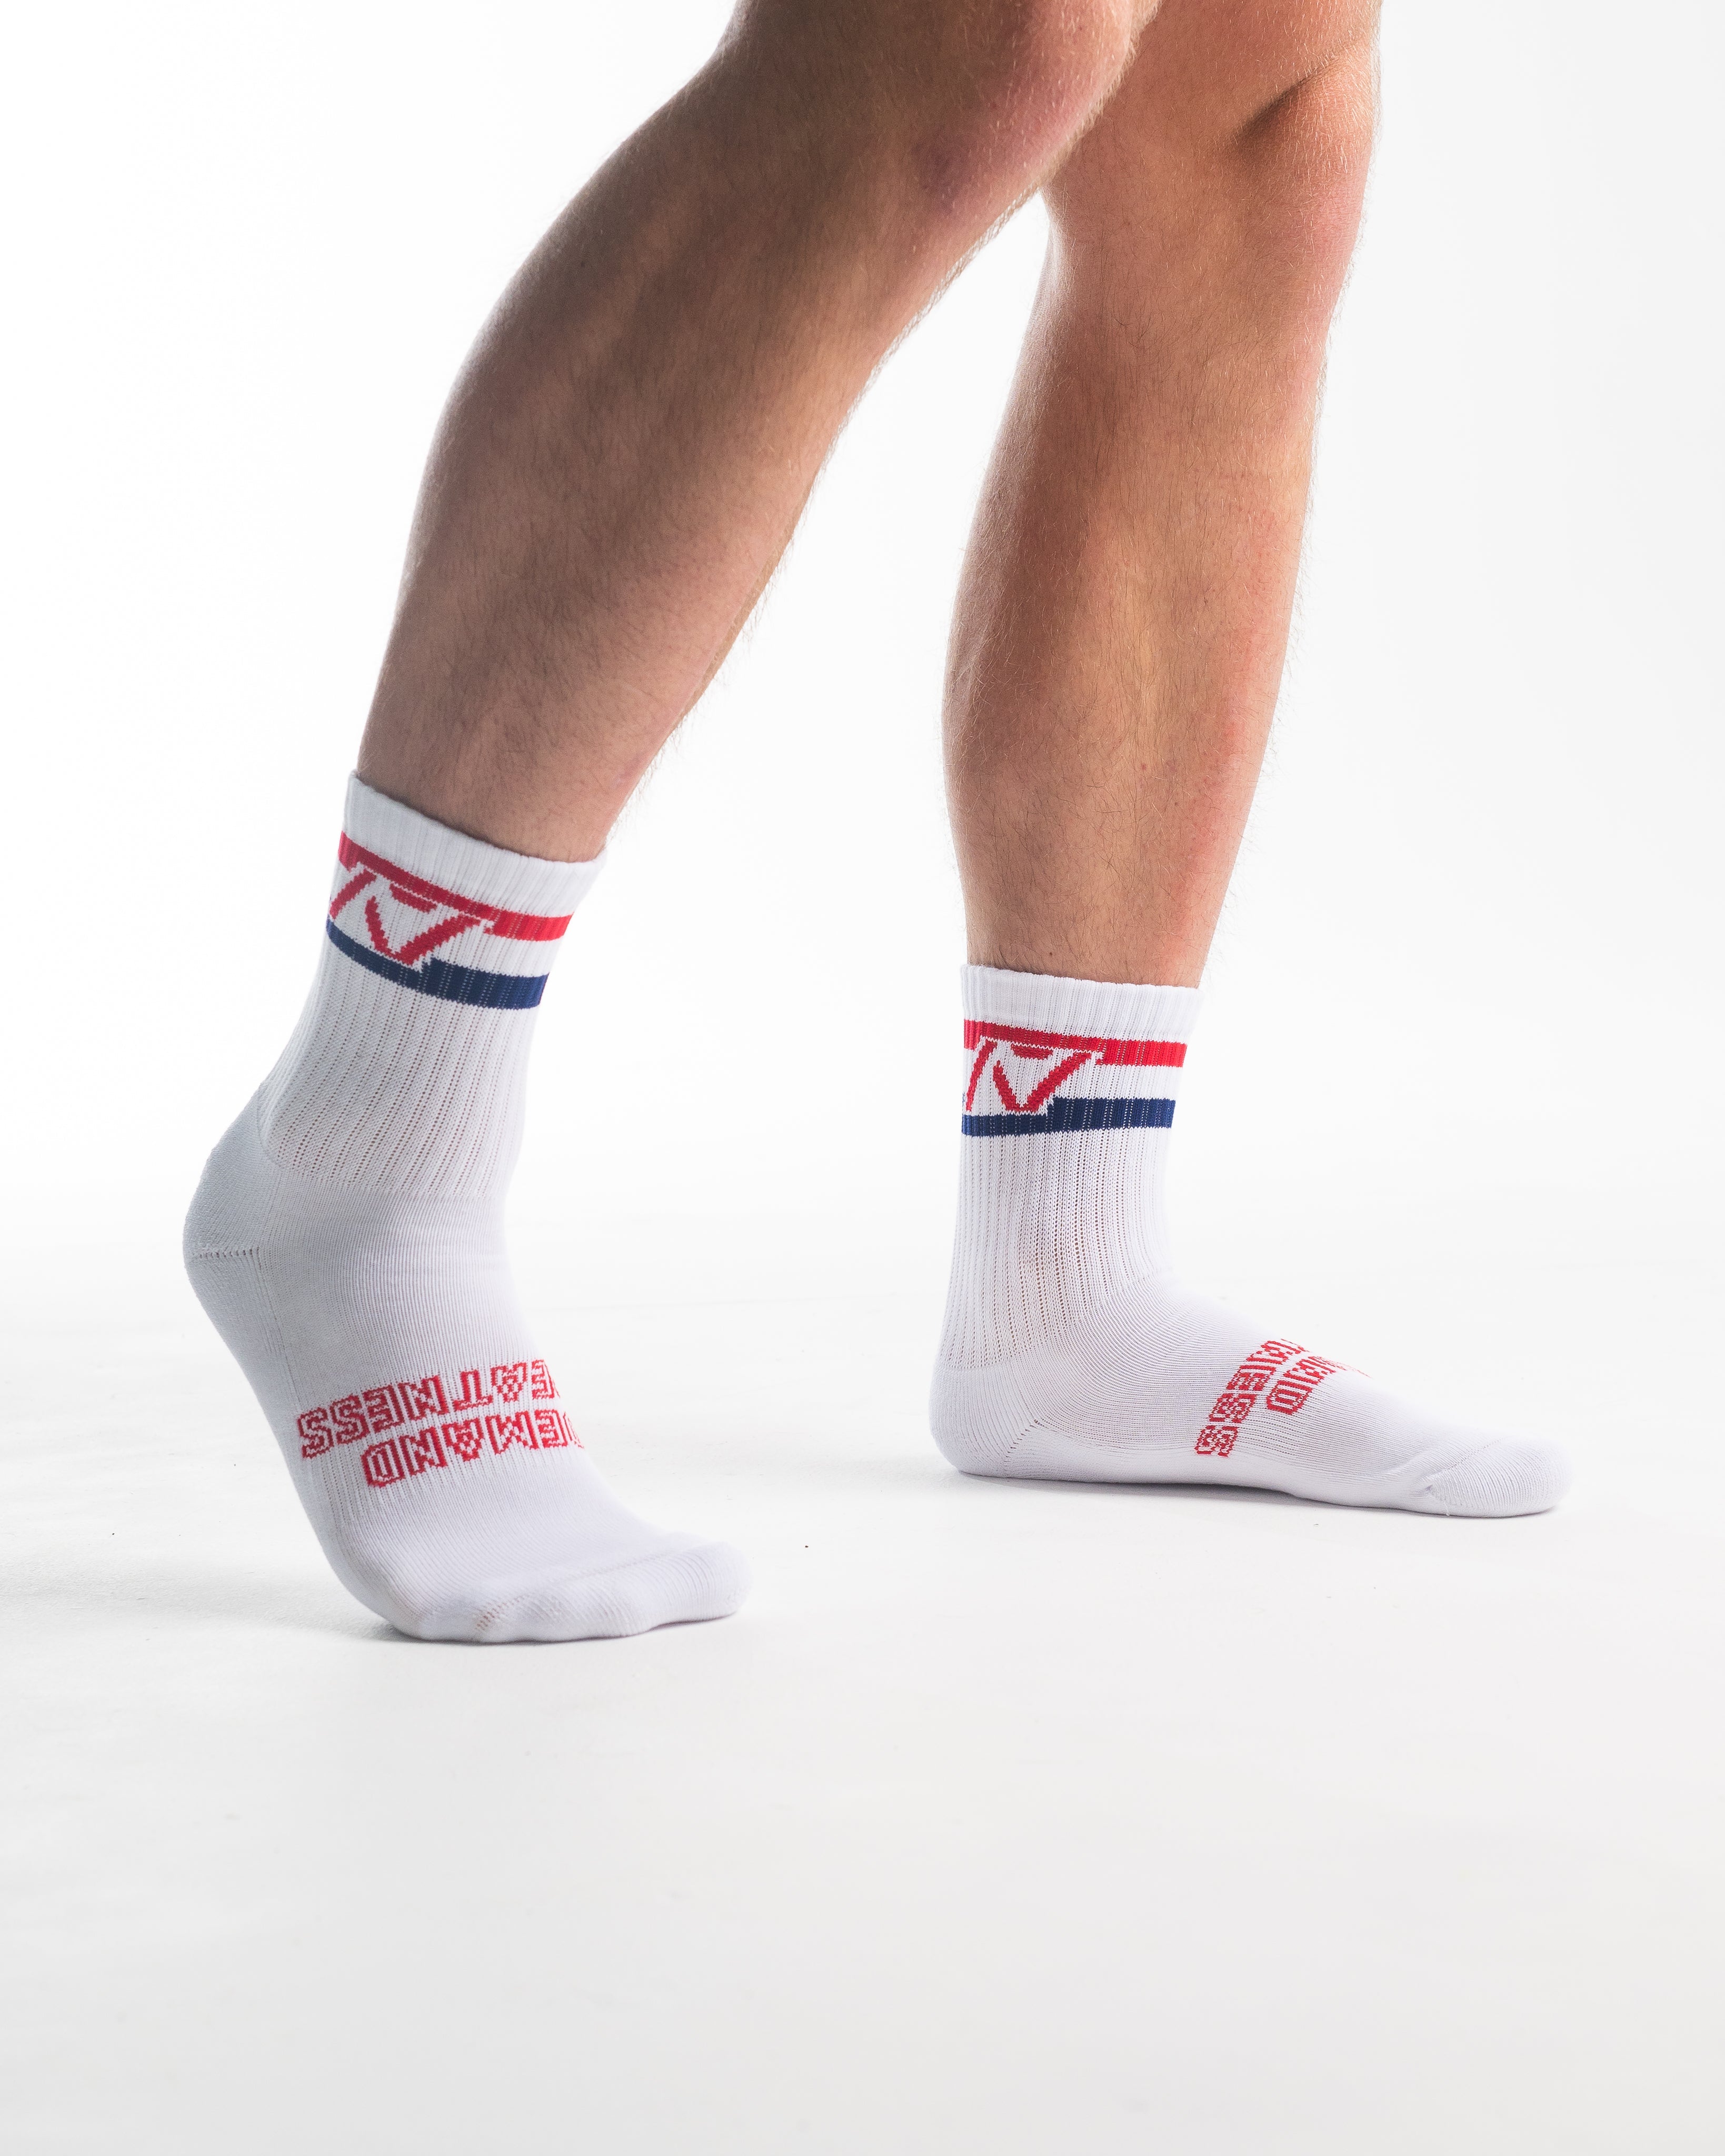 A7 RWB Crew socks showcase redm, white and blue logos and let your energy show on the platform, in your training or while out and about. The IPF Approved Night Light Meet Kit includes Powerlifting Singlet, A7 Meet Shirt, A7 Zebra Wrist Wraps, A7 Deadlift Socks, Hourglass Knee Sleeves (Stiff Knee Sleeves and Rigor Mortis Knee Sleeves). All A7 Powerlifting Equipment shipping to UK, Norway, Switzerland 